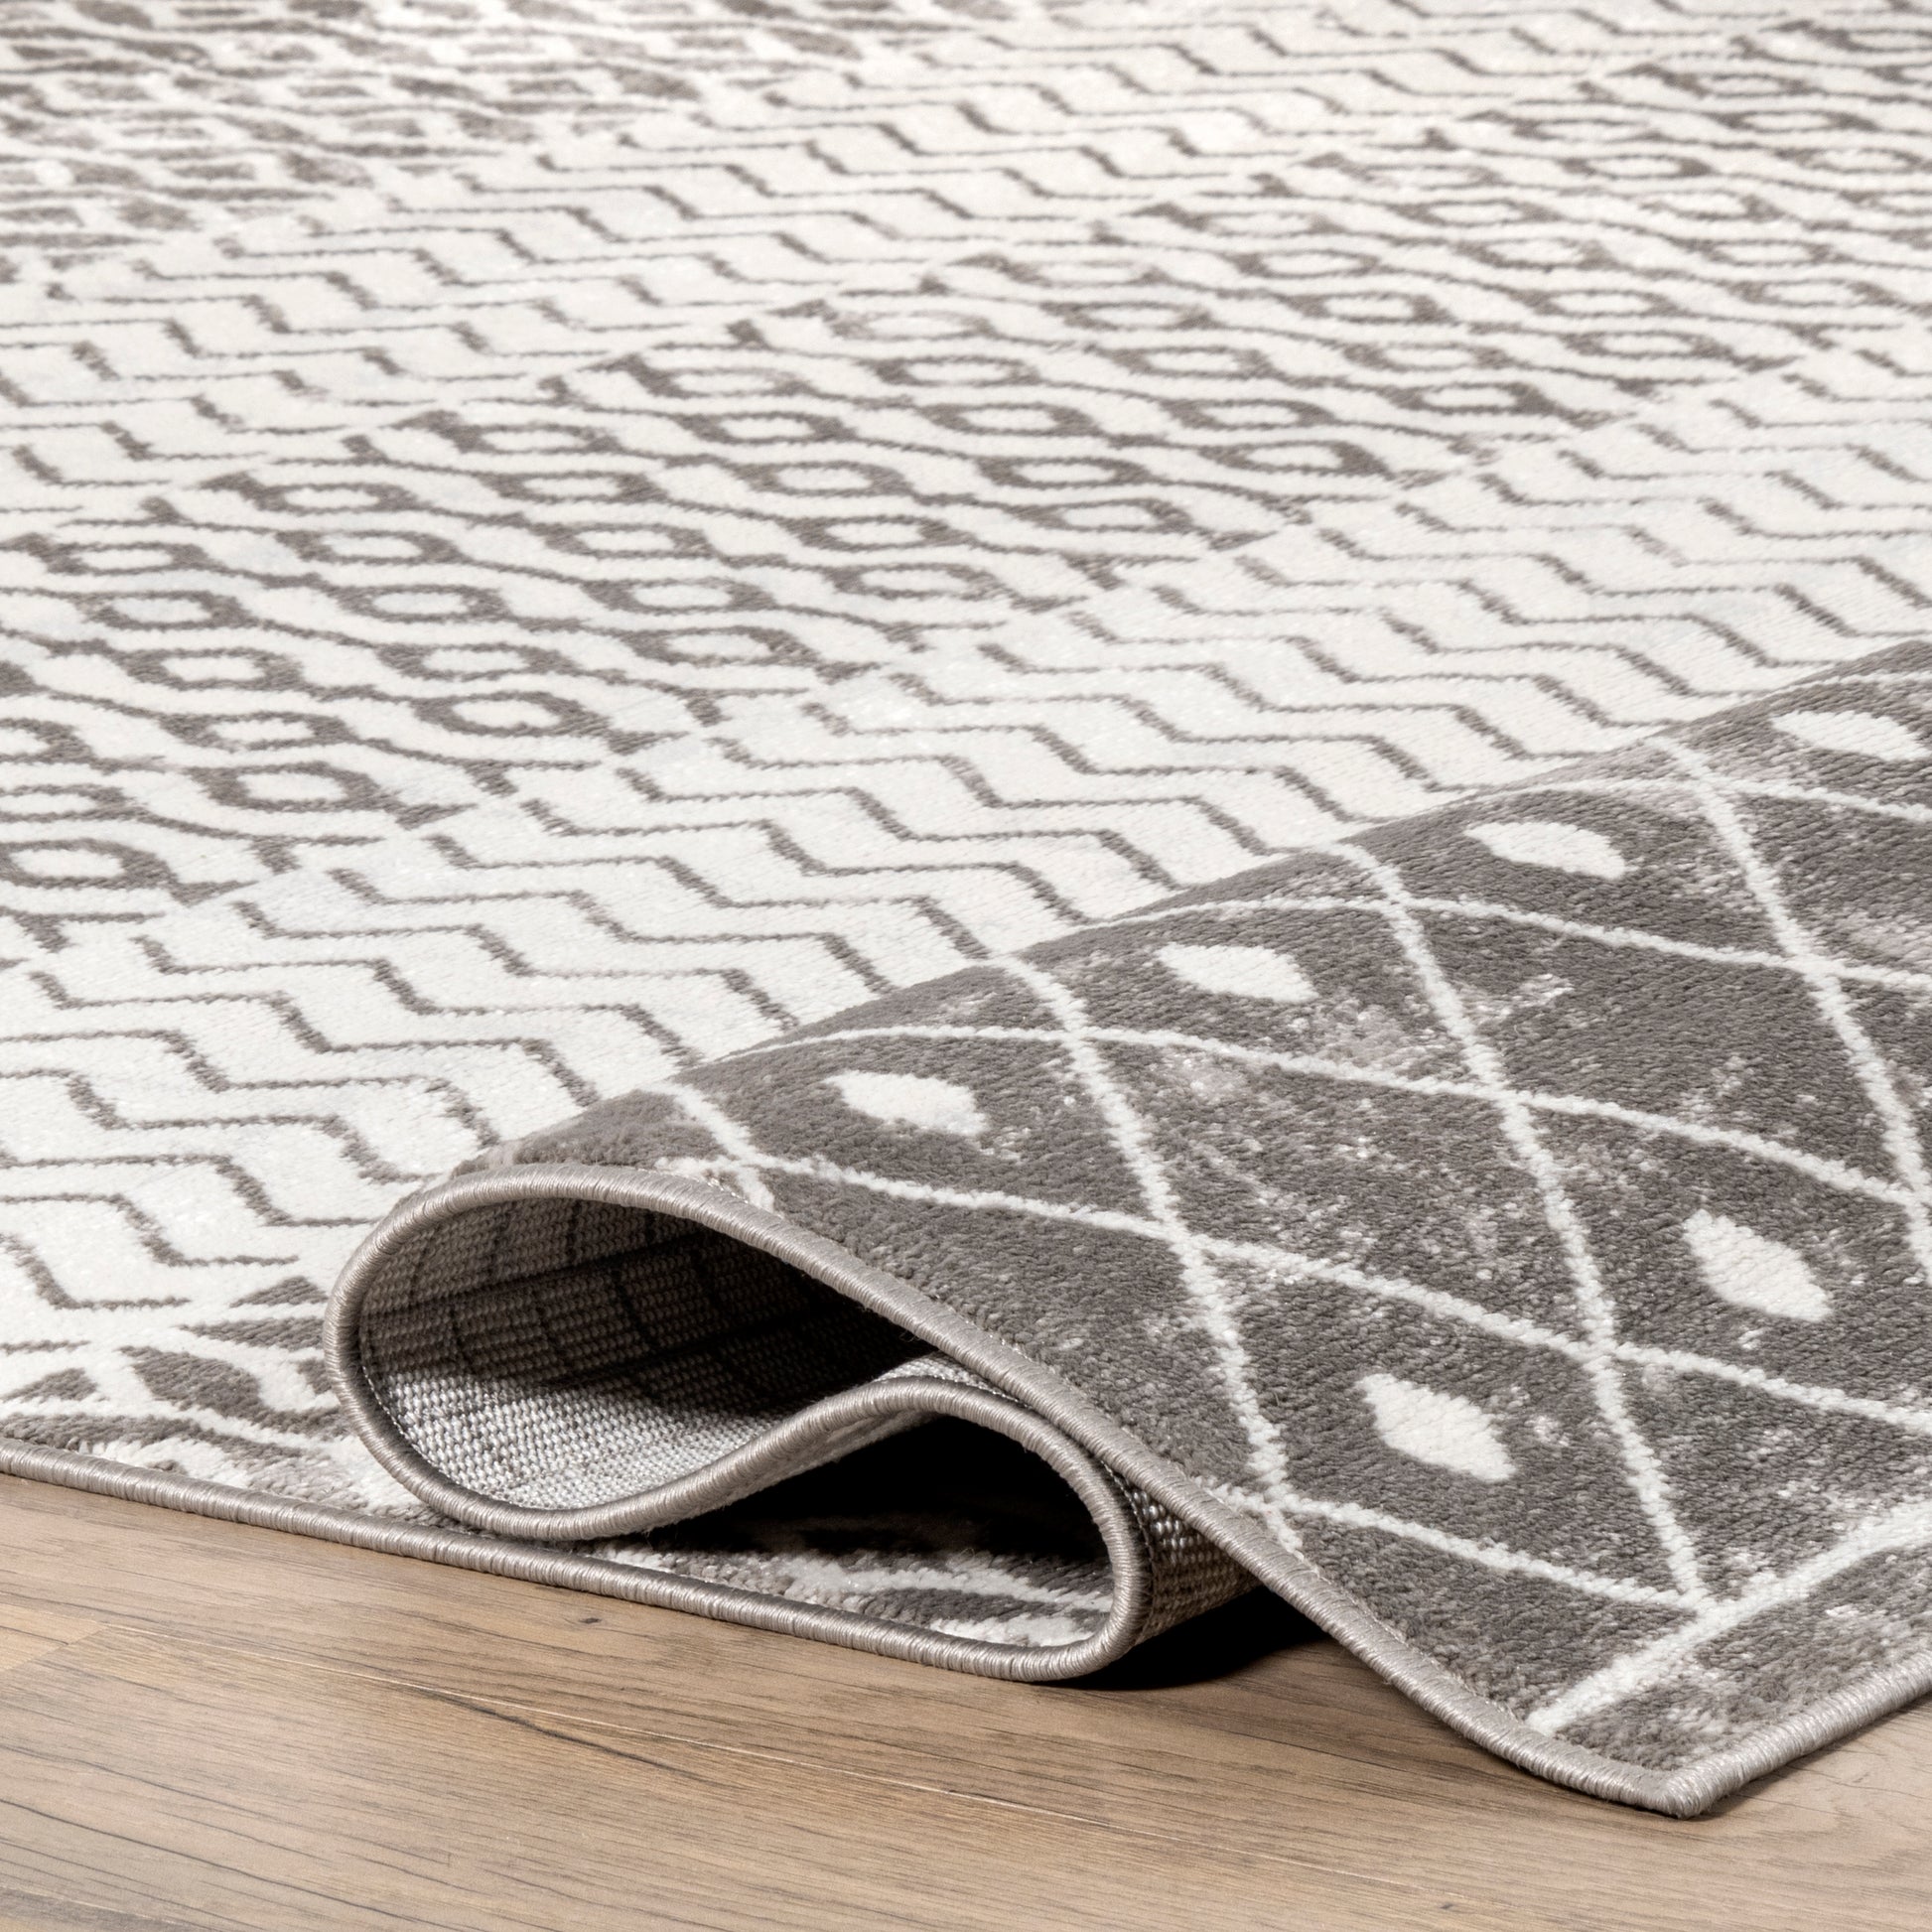 Nuloom Kimberly Moroccan Banded Nki2447A Gray Area Rug